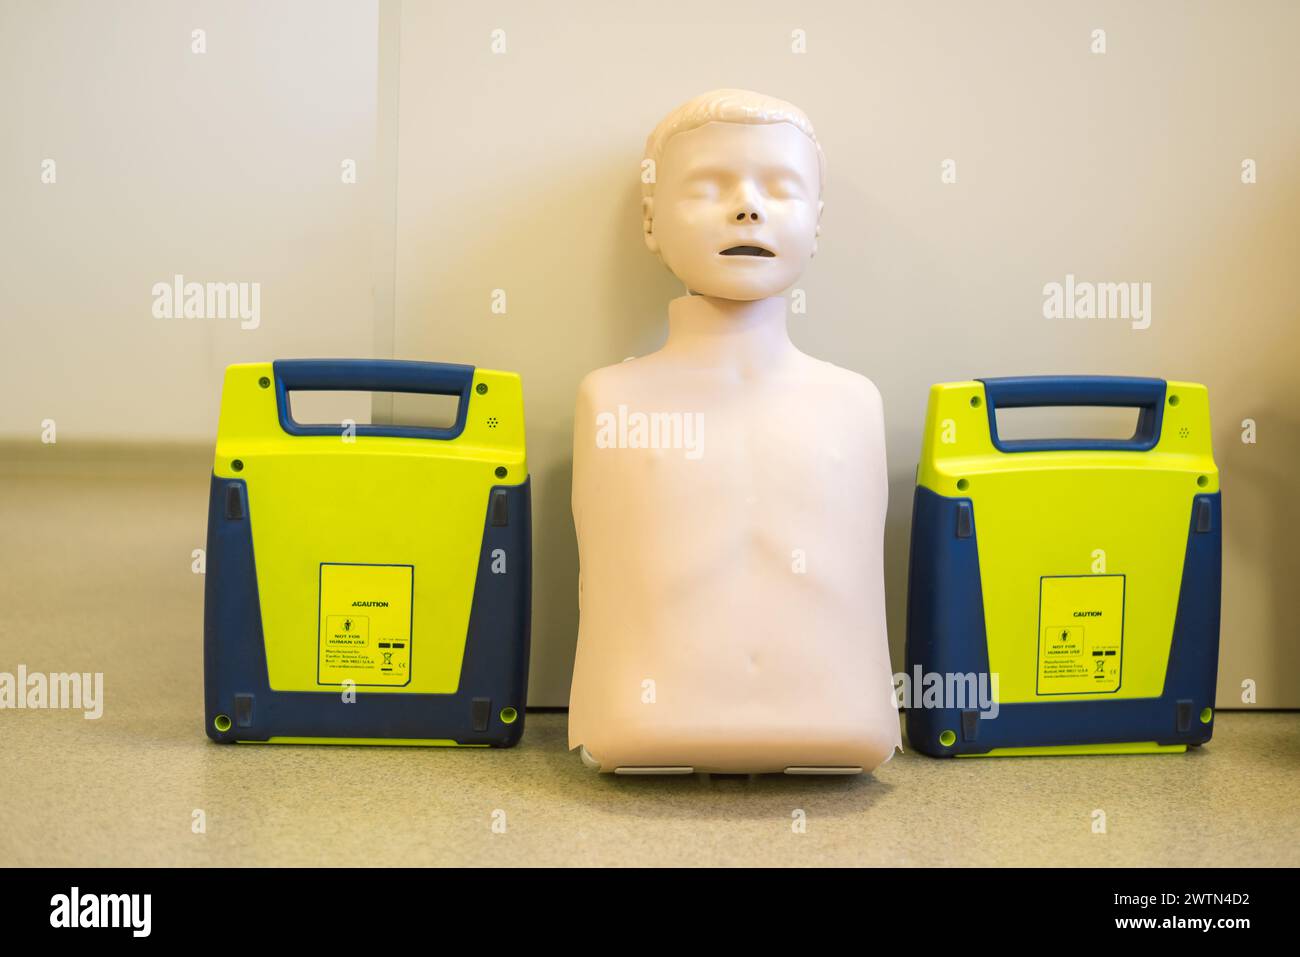 Manikin for demonstration of CPR Cardiopulmonary resuscitation for resurrected patients and Automated External Defibrillator. Stock Photo